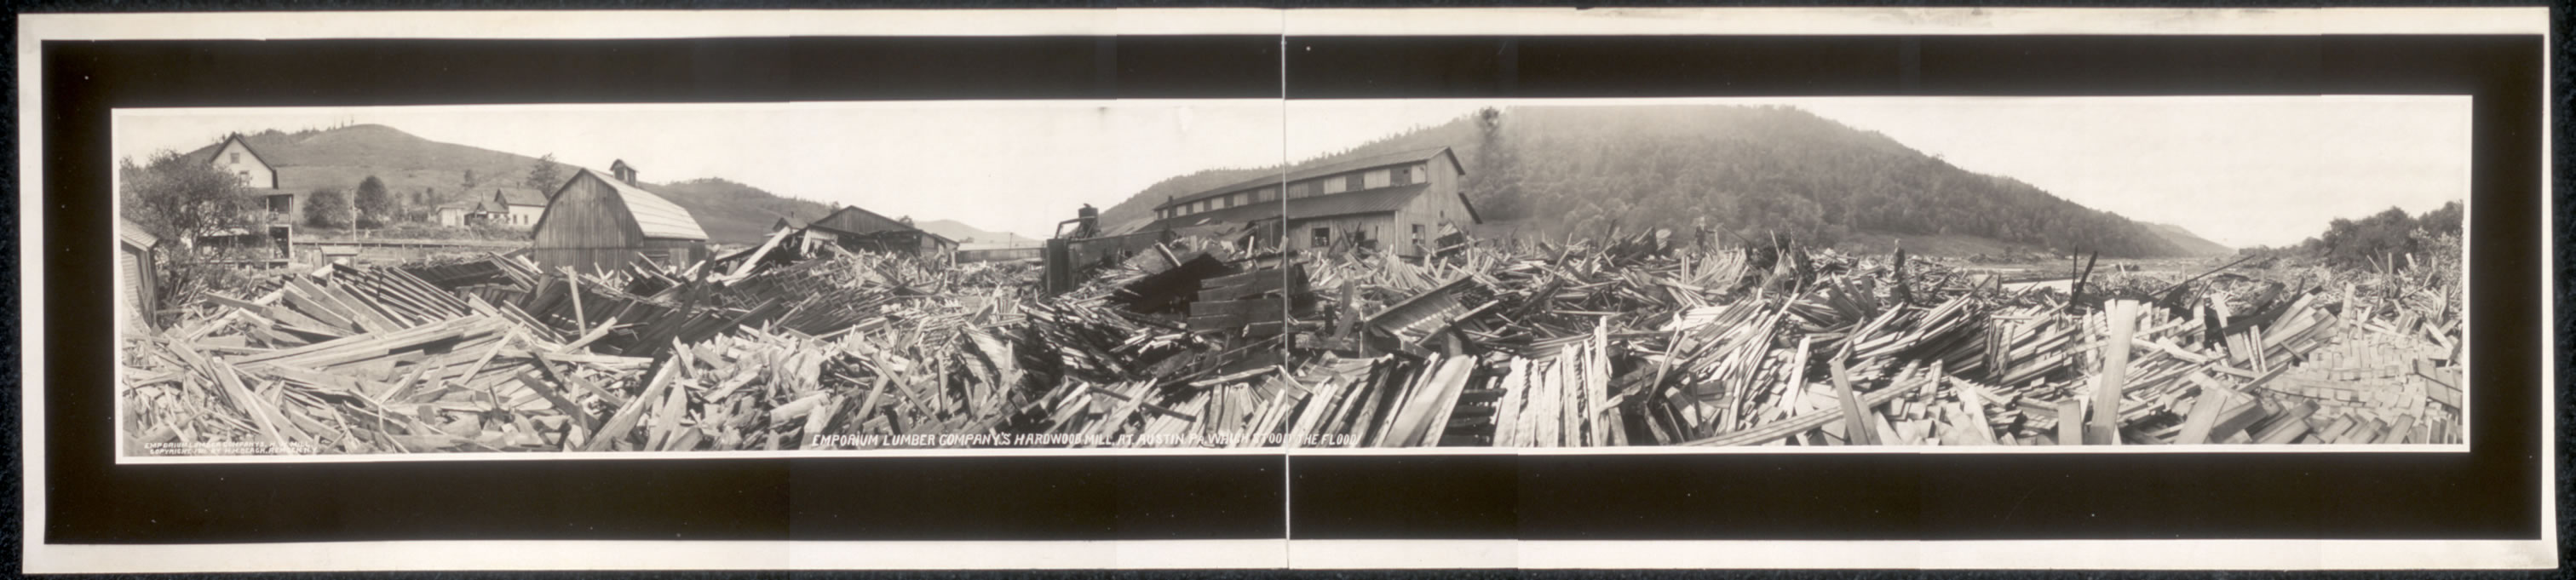 Panorama of the Destruction from 1911